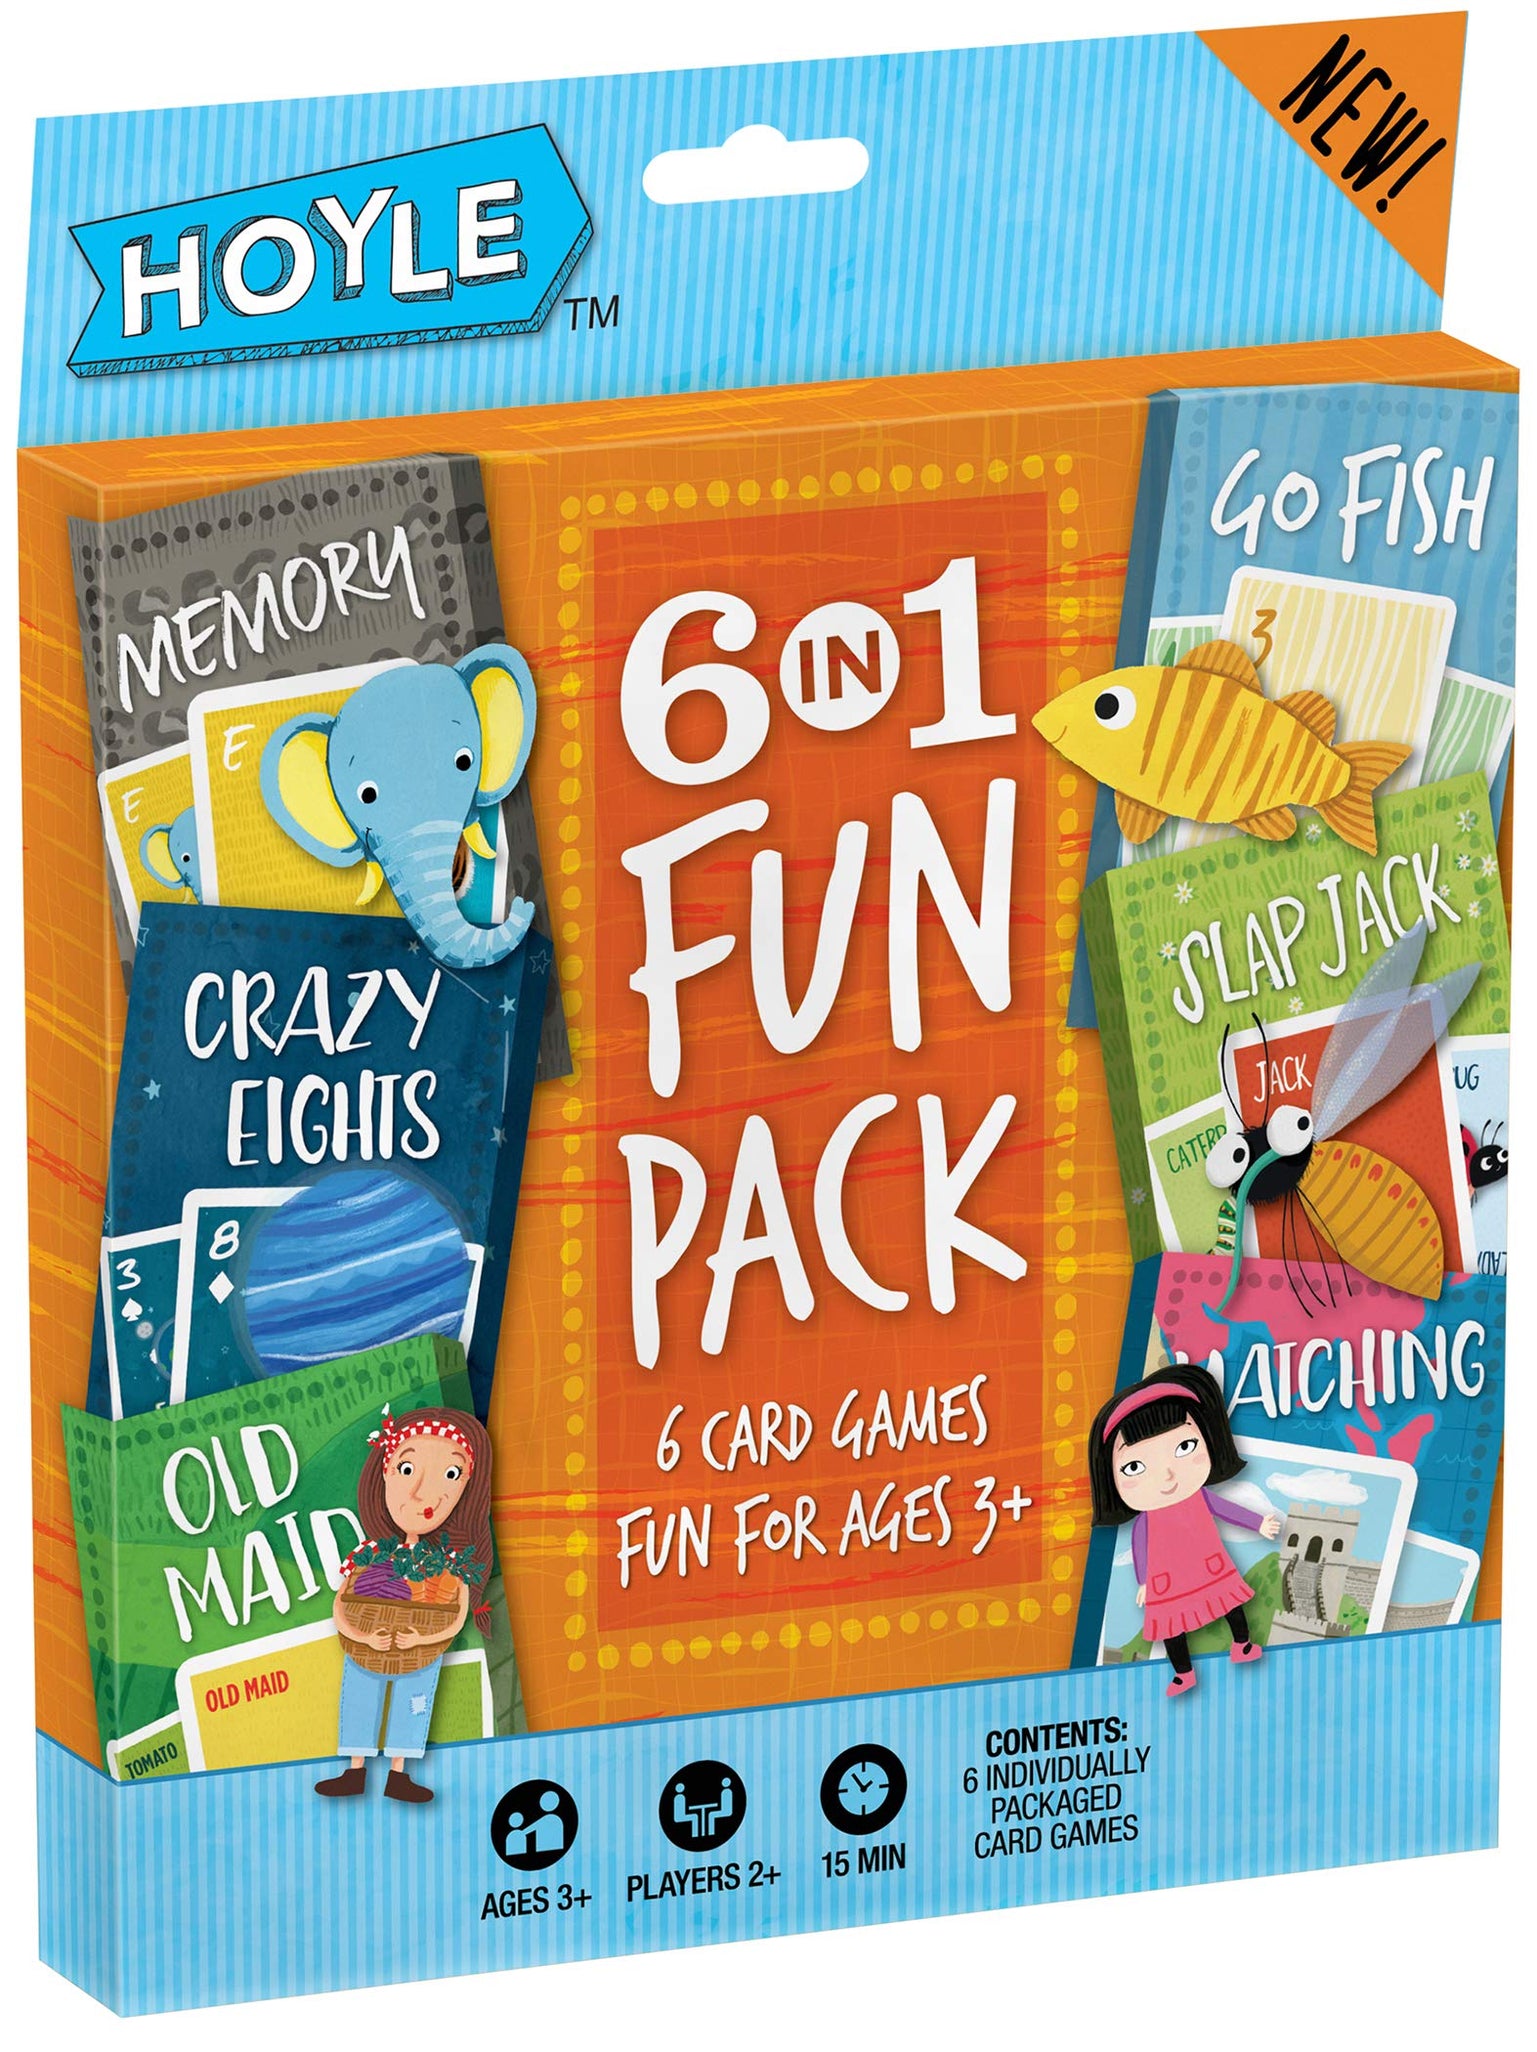 Hoyle 6 in 1 Fun Pack - Kids Card Games - Ages 3 & Up - Memory, Go Fish, Crazy Eights, Old Maid, Matching, Slap Jack